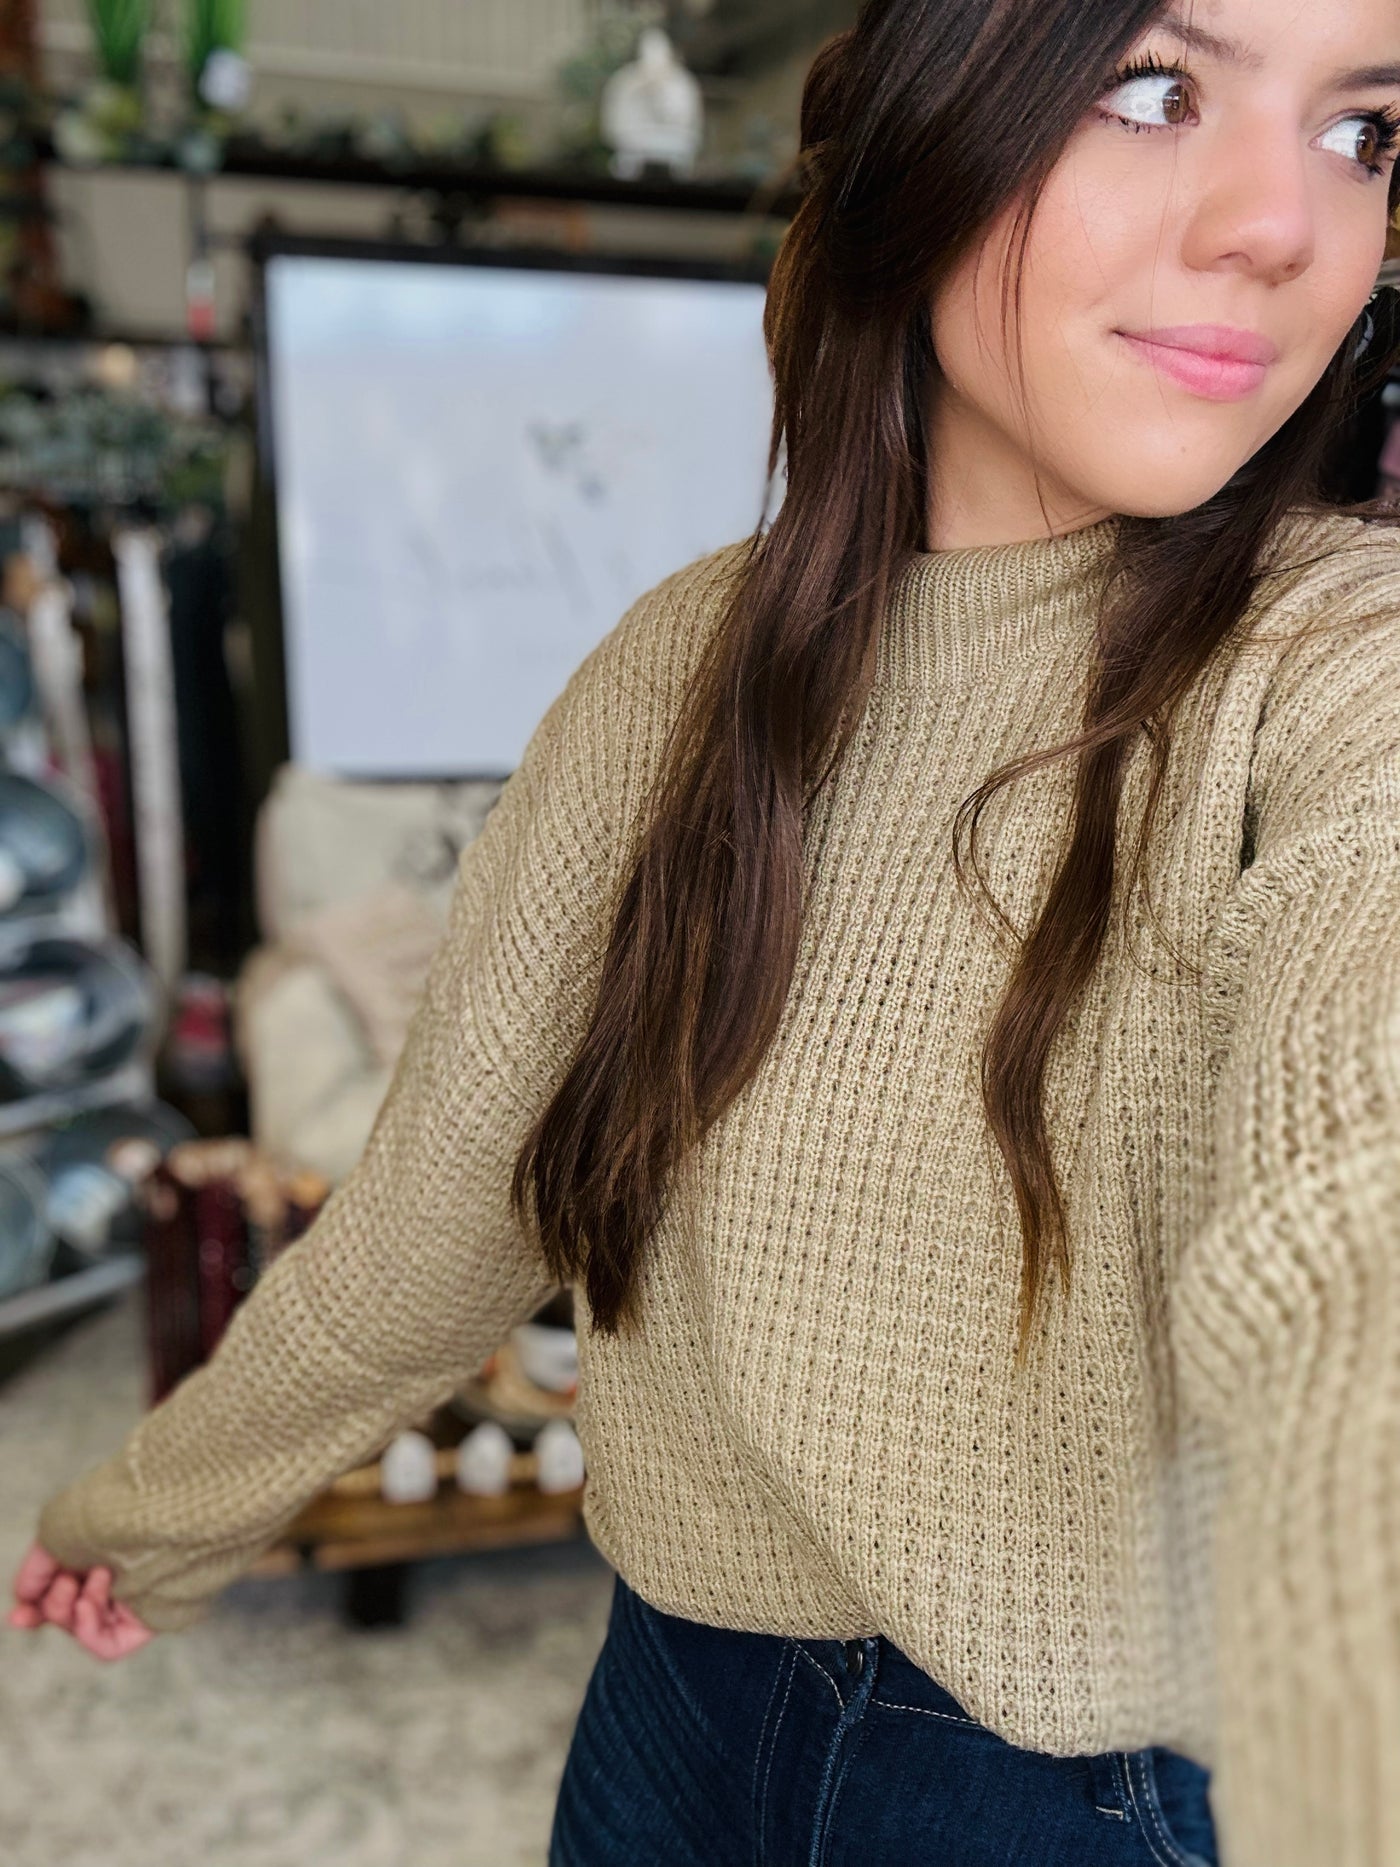 The Cozy Waffle Sweater